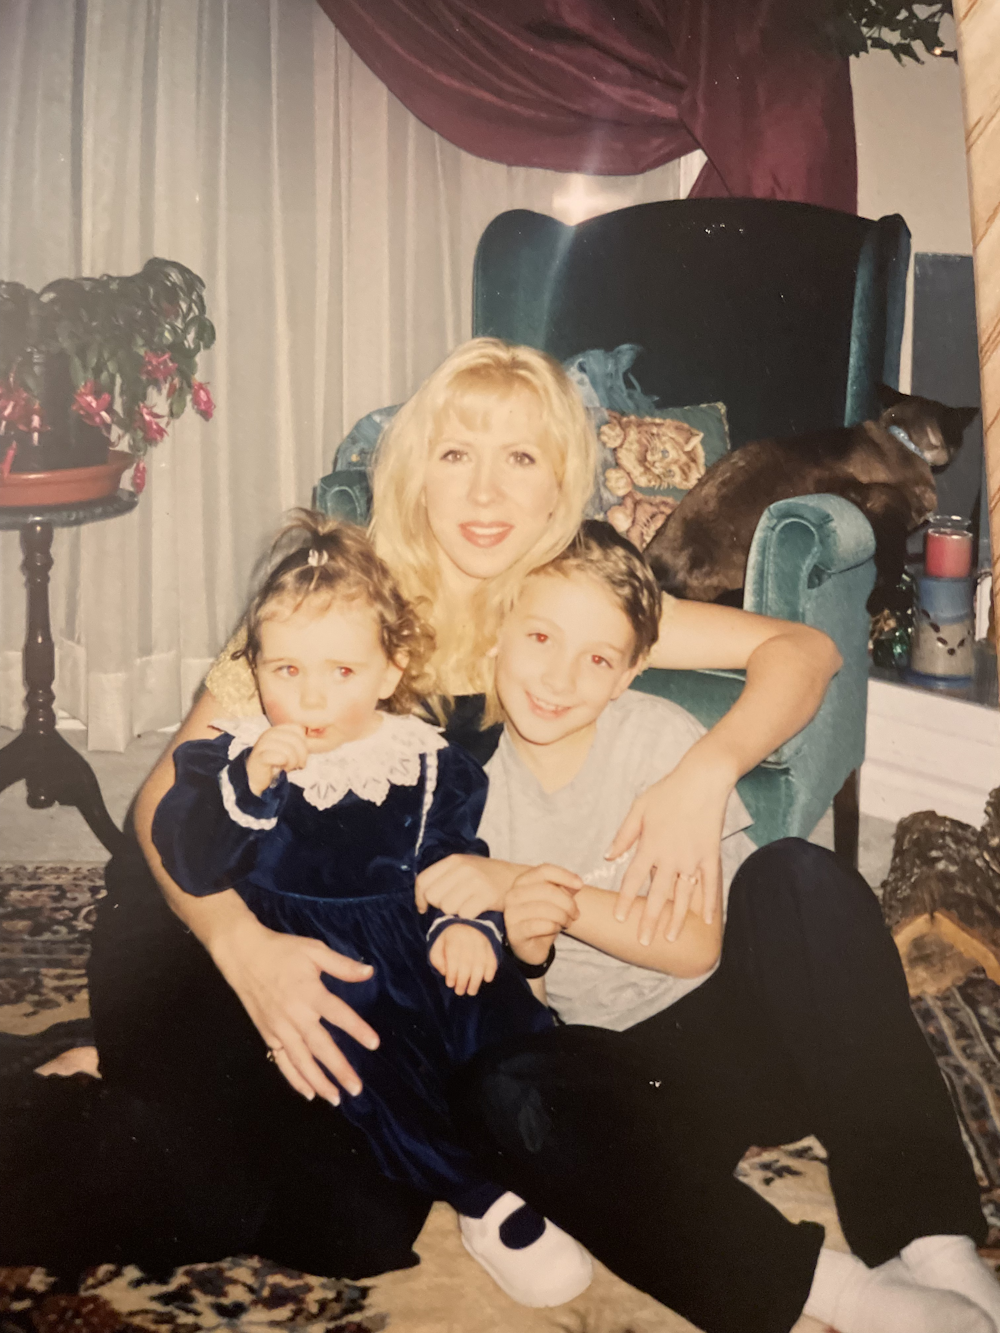 Yvette , Victoria and Matthew 💋💕🎀 Yvette’s circle of life x3. Victoria enjoying a lollipop and hating getting pictures taken. Matthew and Yvette with big beautiful smiles ready for the family photo 2004 